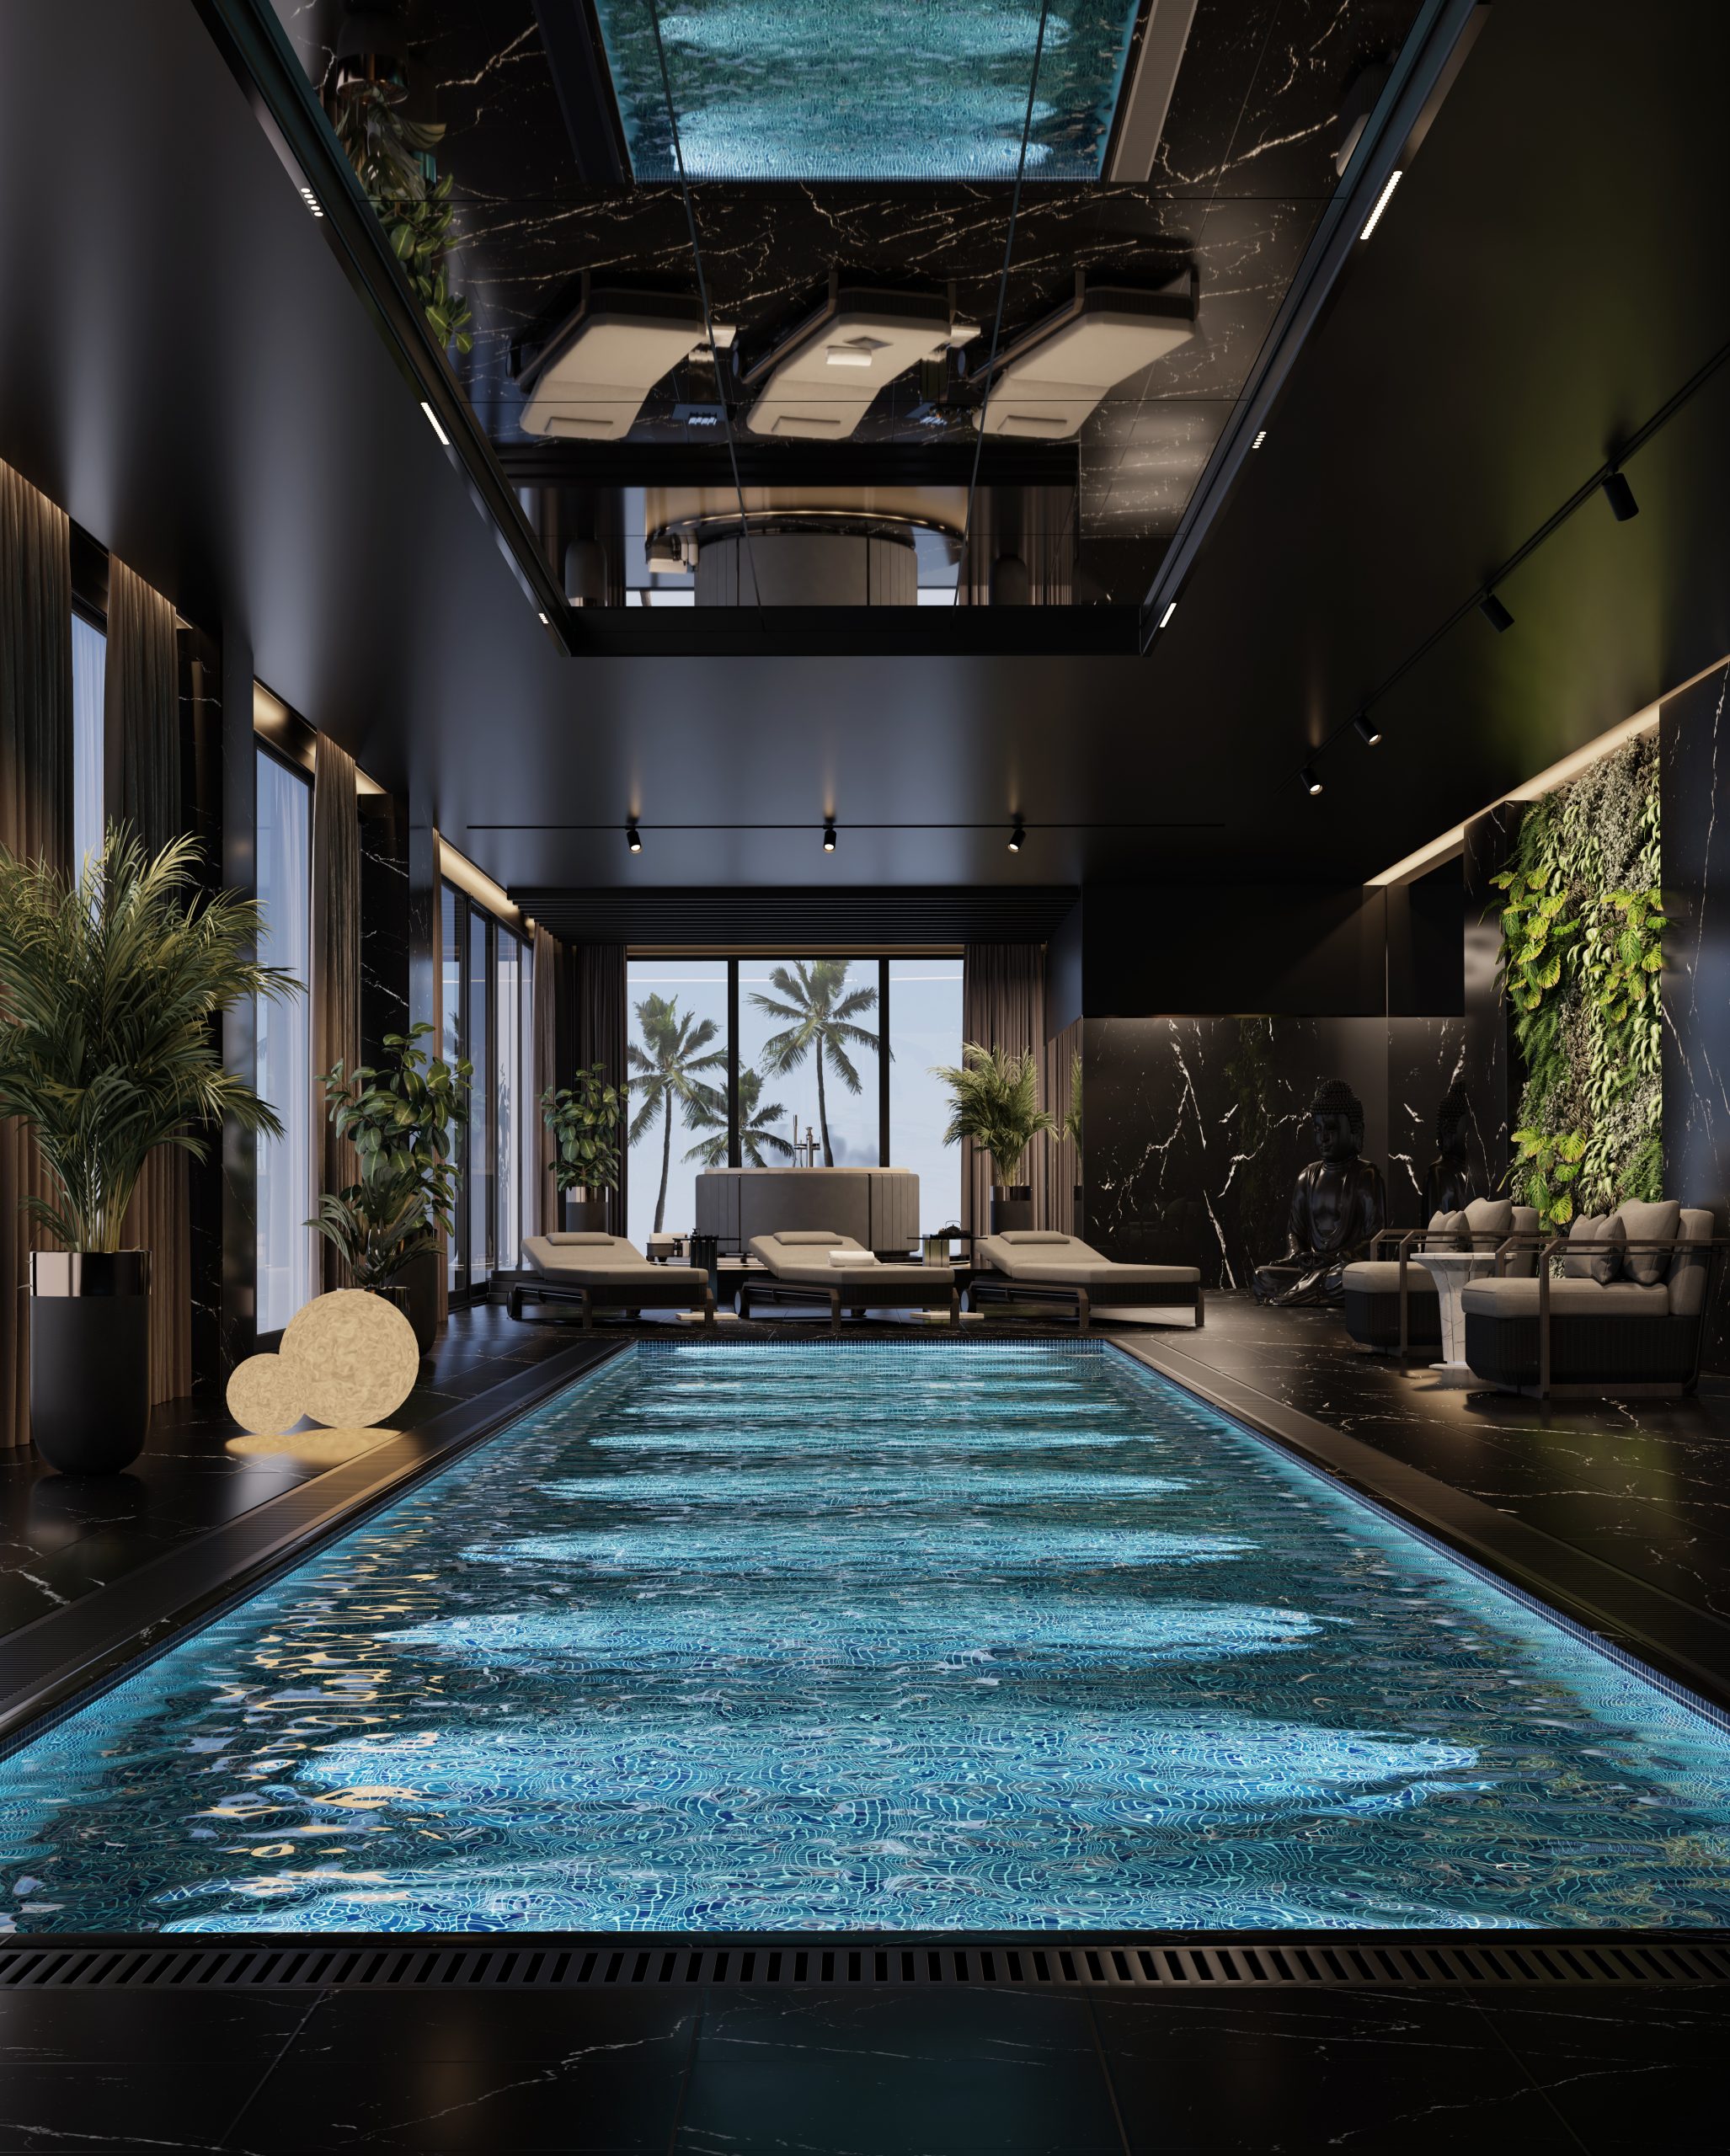 How To Decorate Your Own Indoor Pool Or Spa!